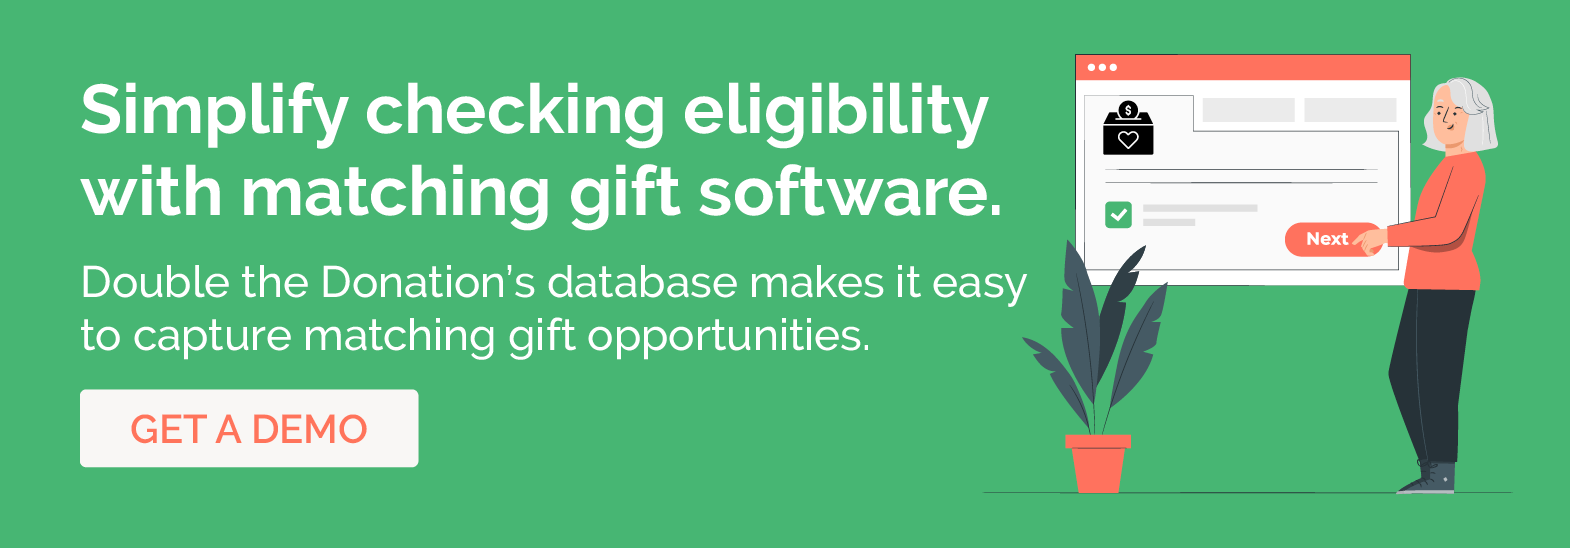 Click to get a demo of Double the Donation’s software to check matching gift eligibility and capture all available opportunities.